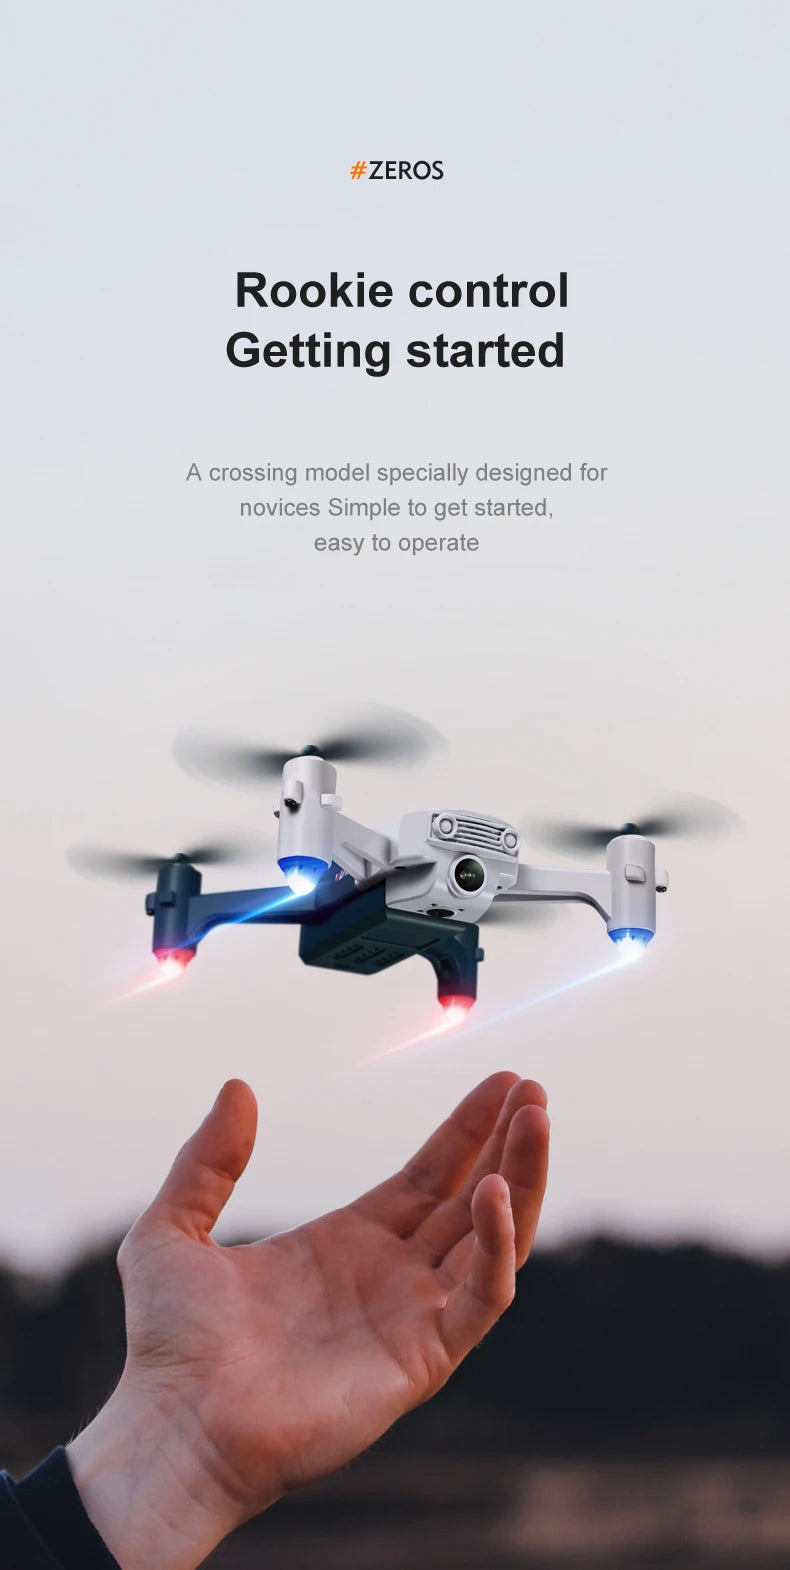 V15 Drone, zeros zeros is a crossing model specially designed for novices